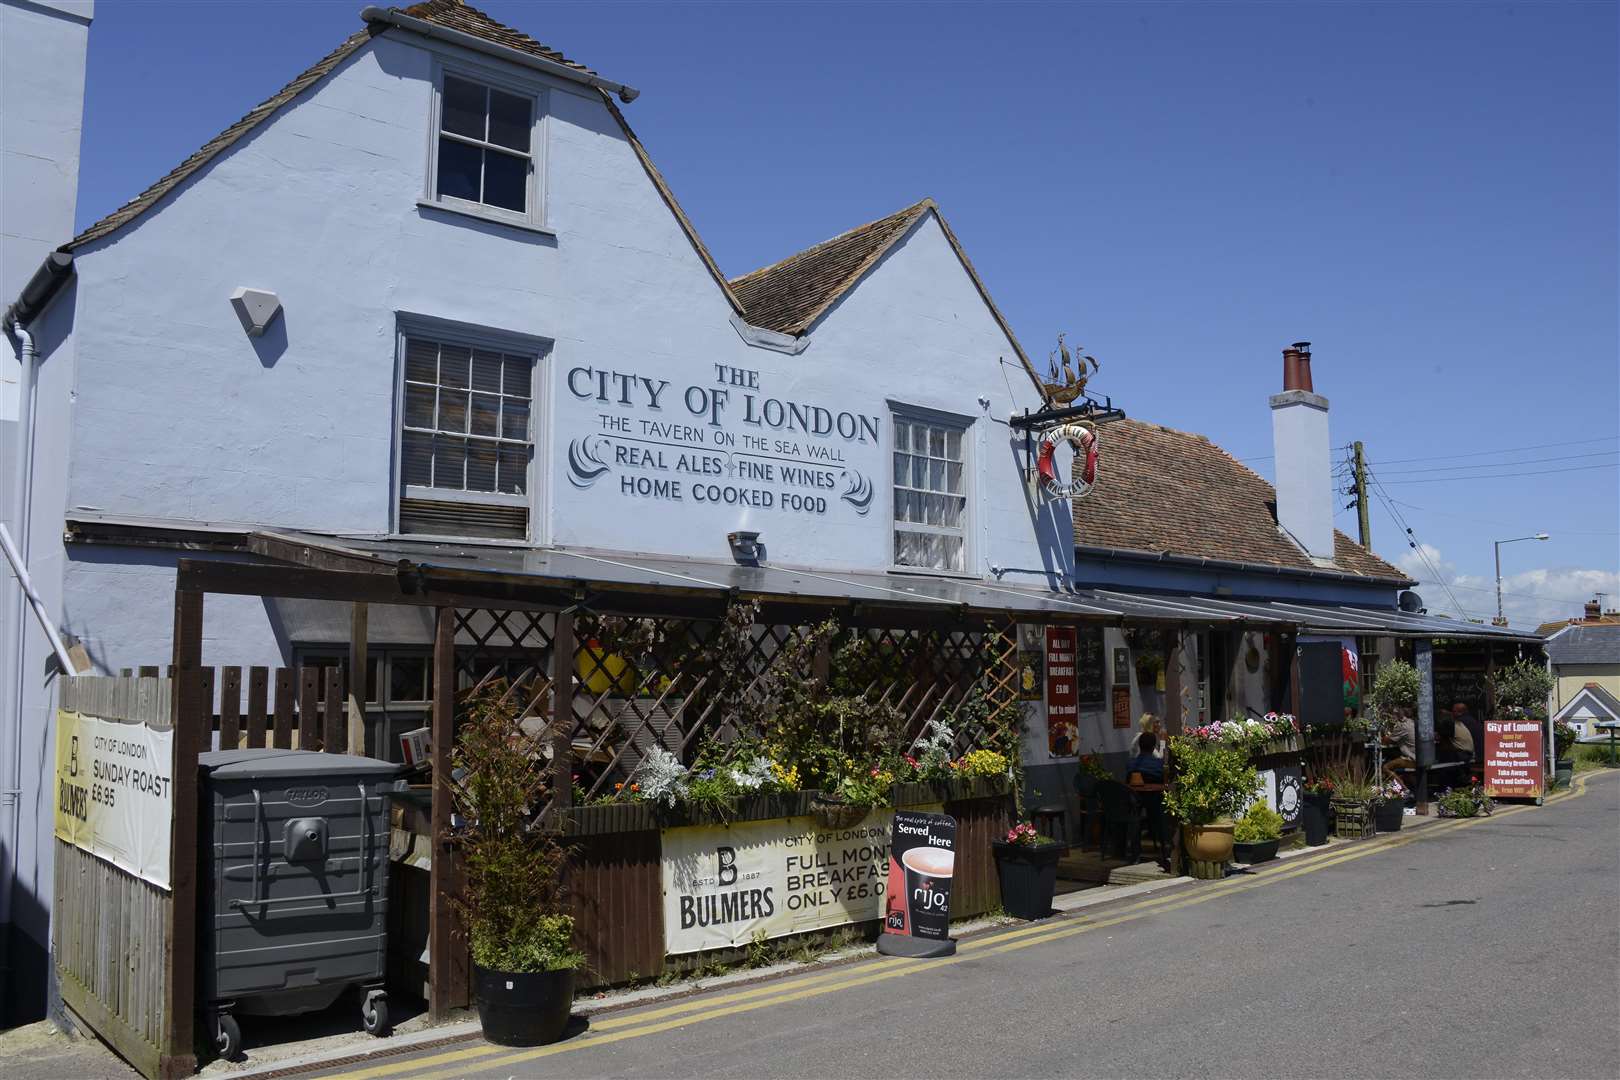 The City of London pub in Dymchurch has gone on the market